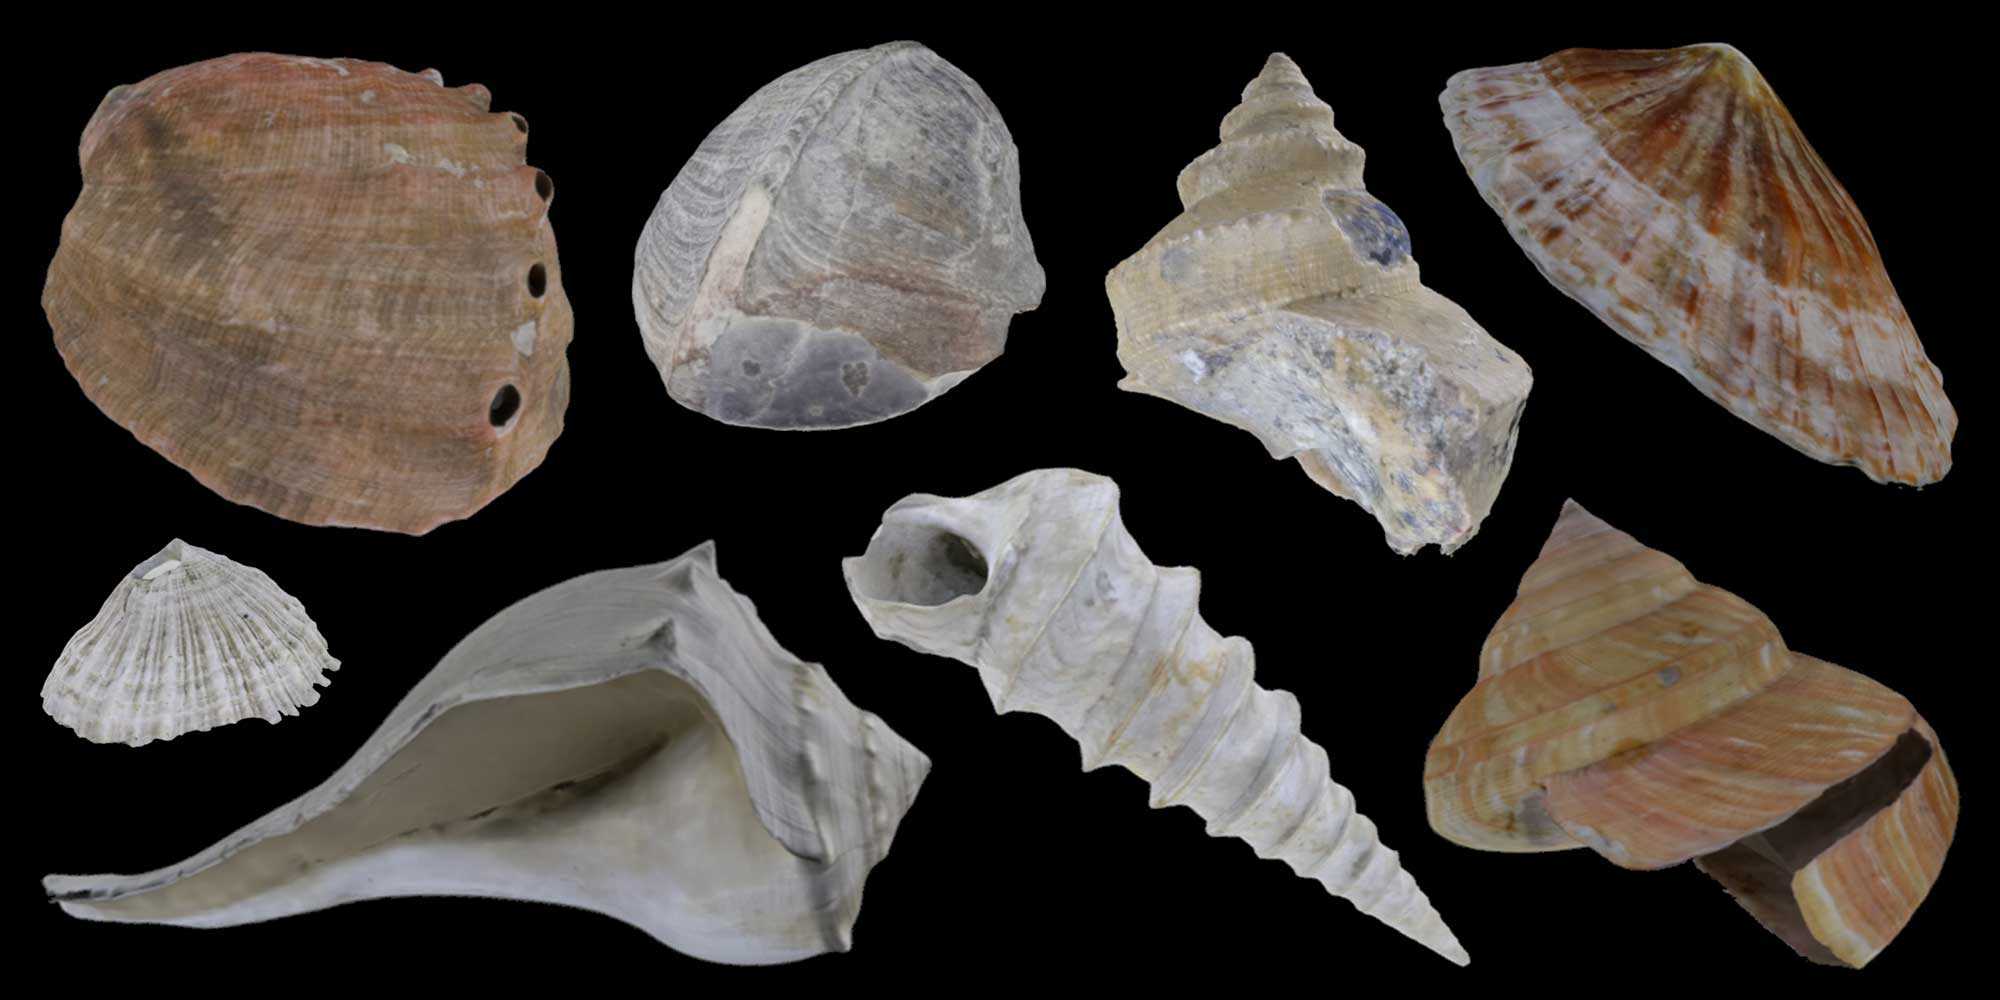 Image shows a variety of 3D models of modern and fossil gastropod shells.